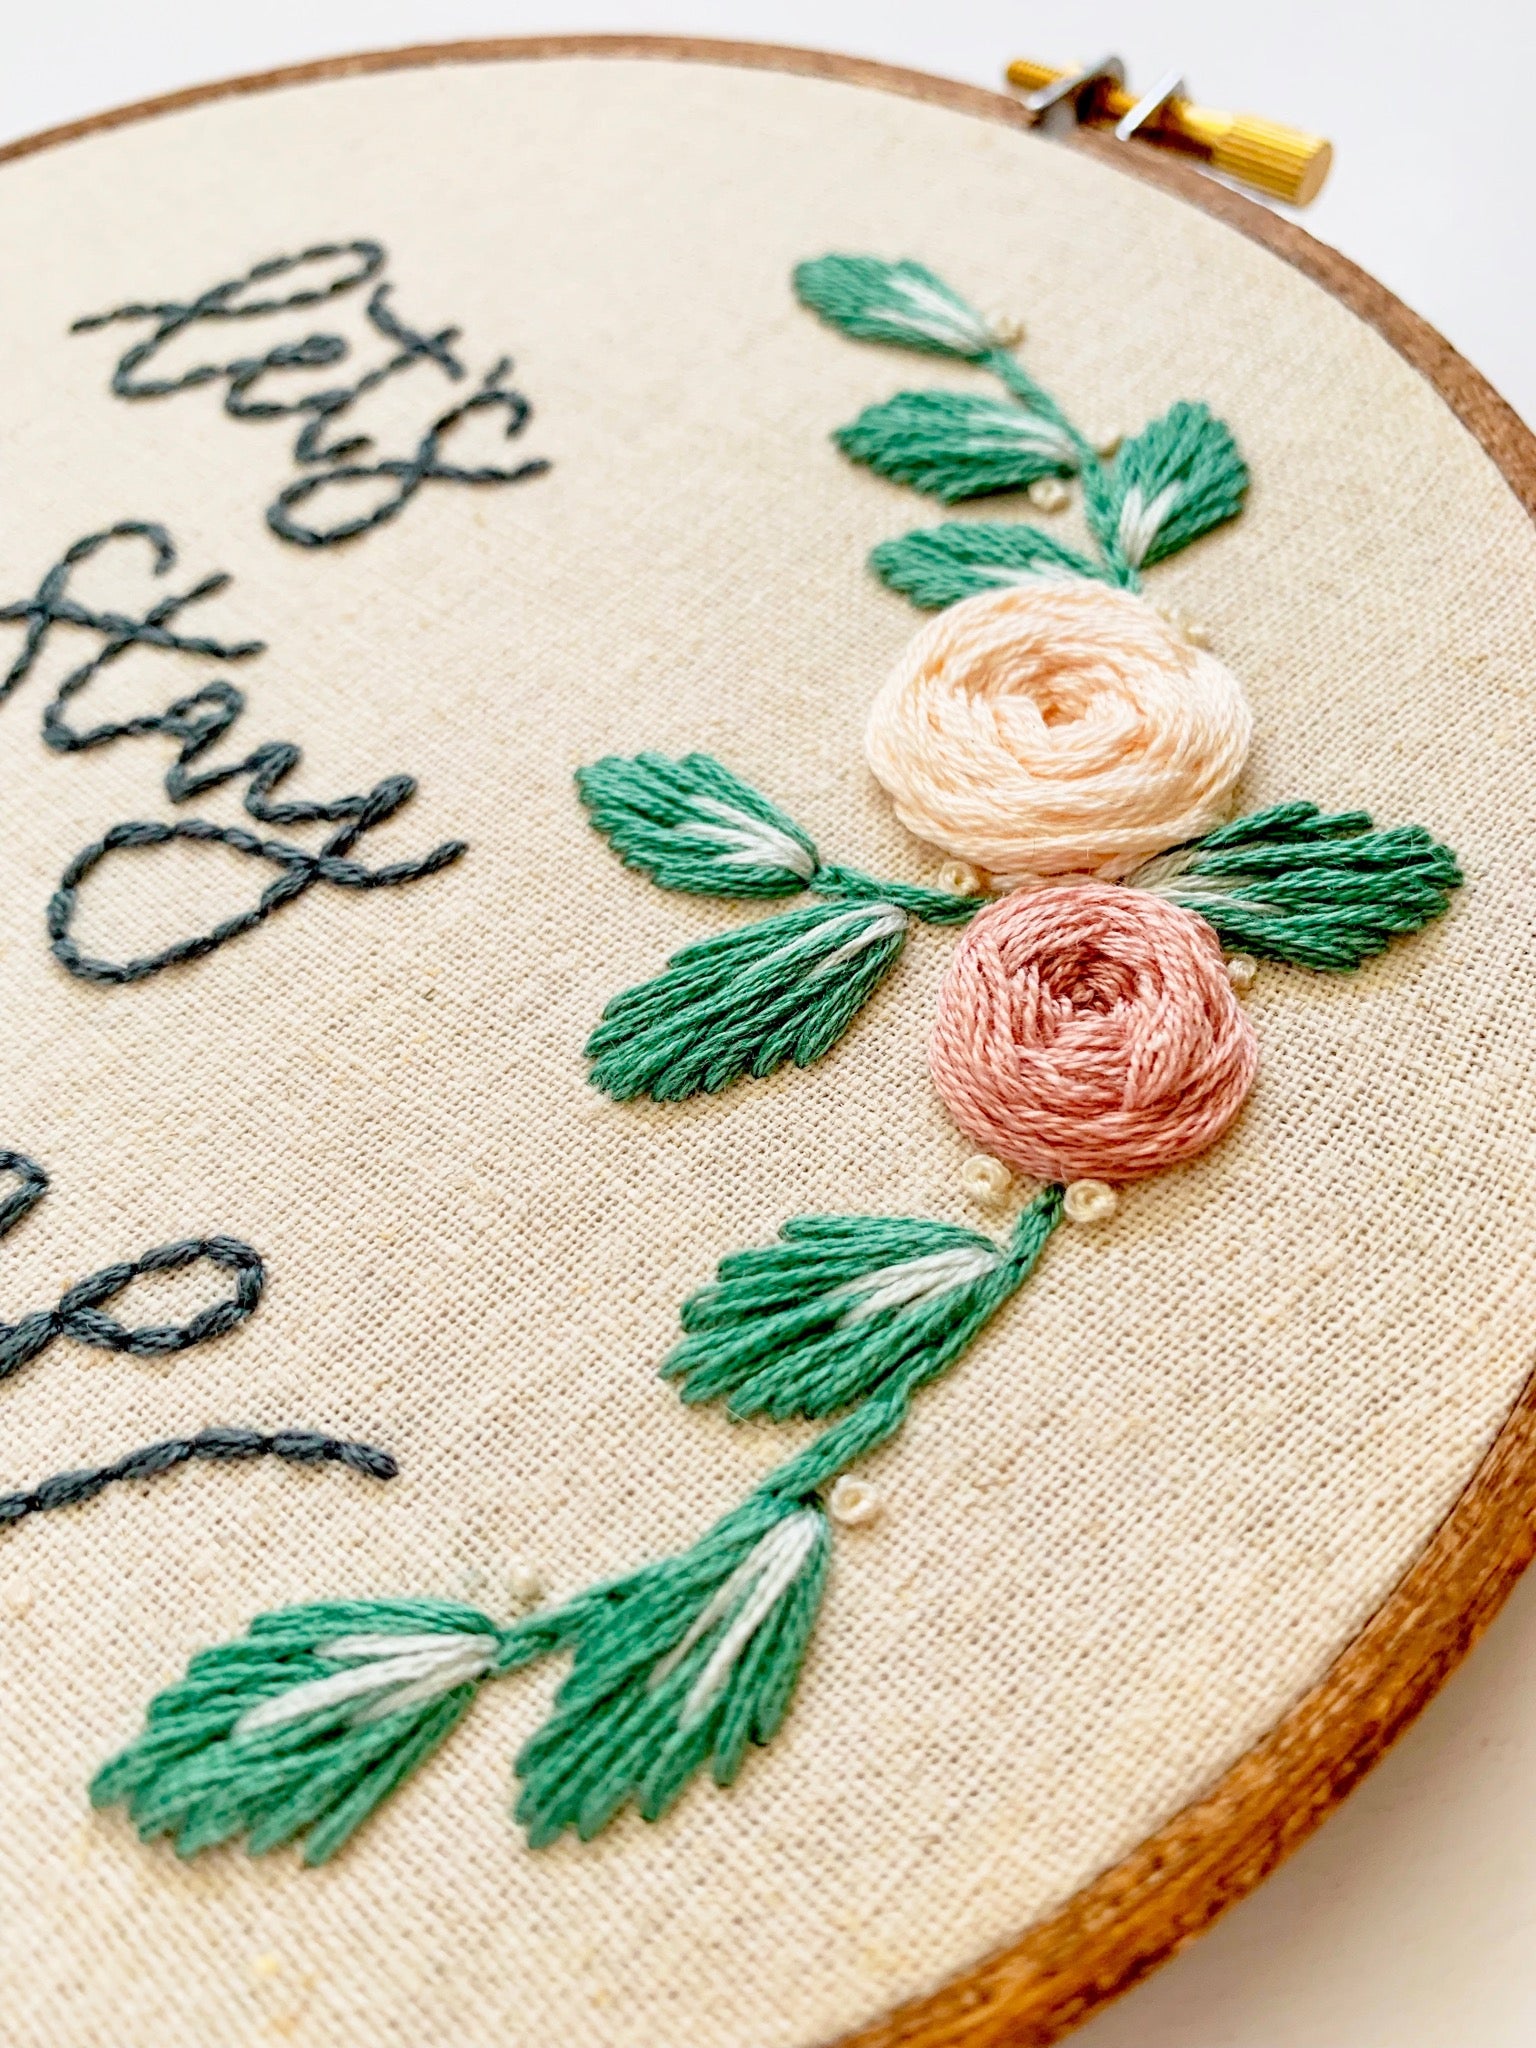 Let's stay home embroidery hoop art with embroidered pink roses and green leaves.